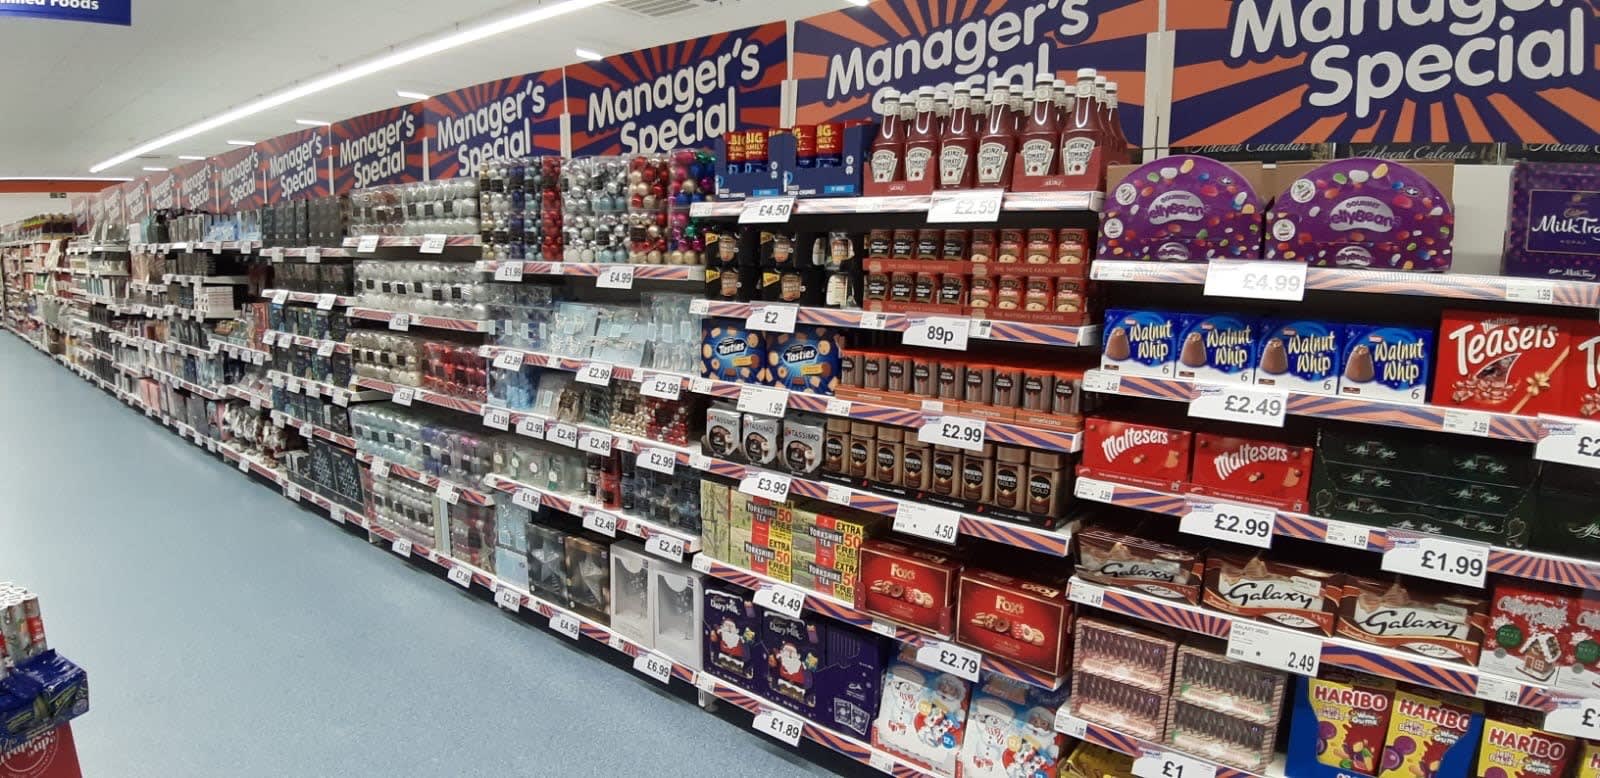 You'll find the full selection of this month's Managers Specials at B&M's newly refurbished Home Store in Derby.